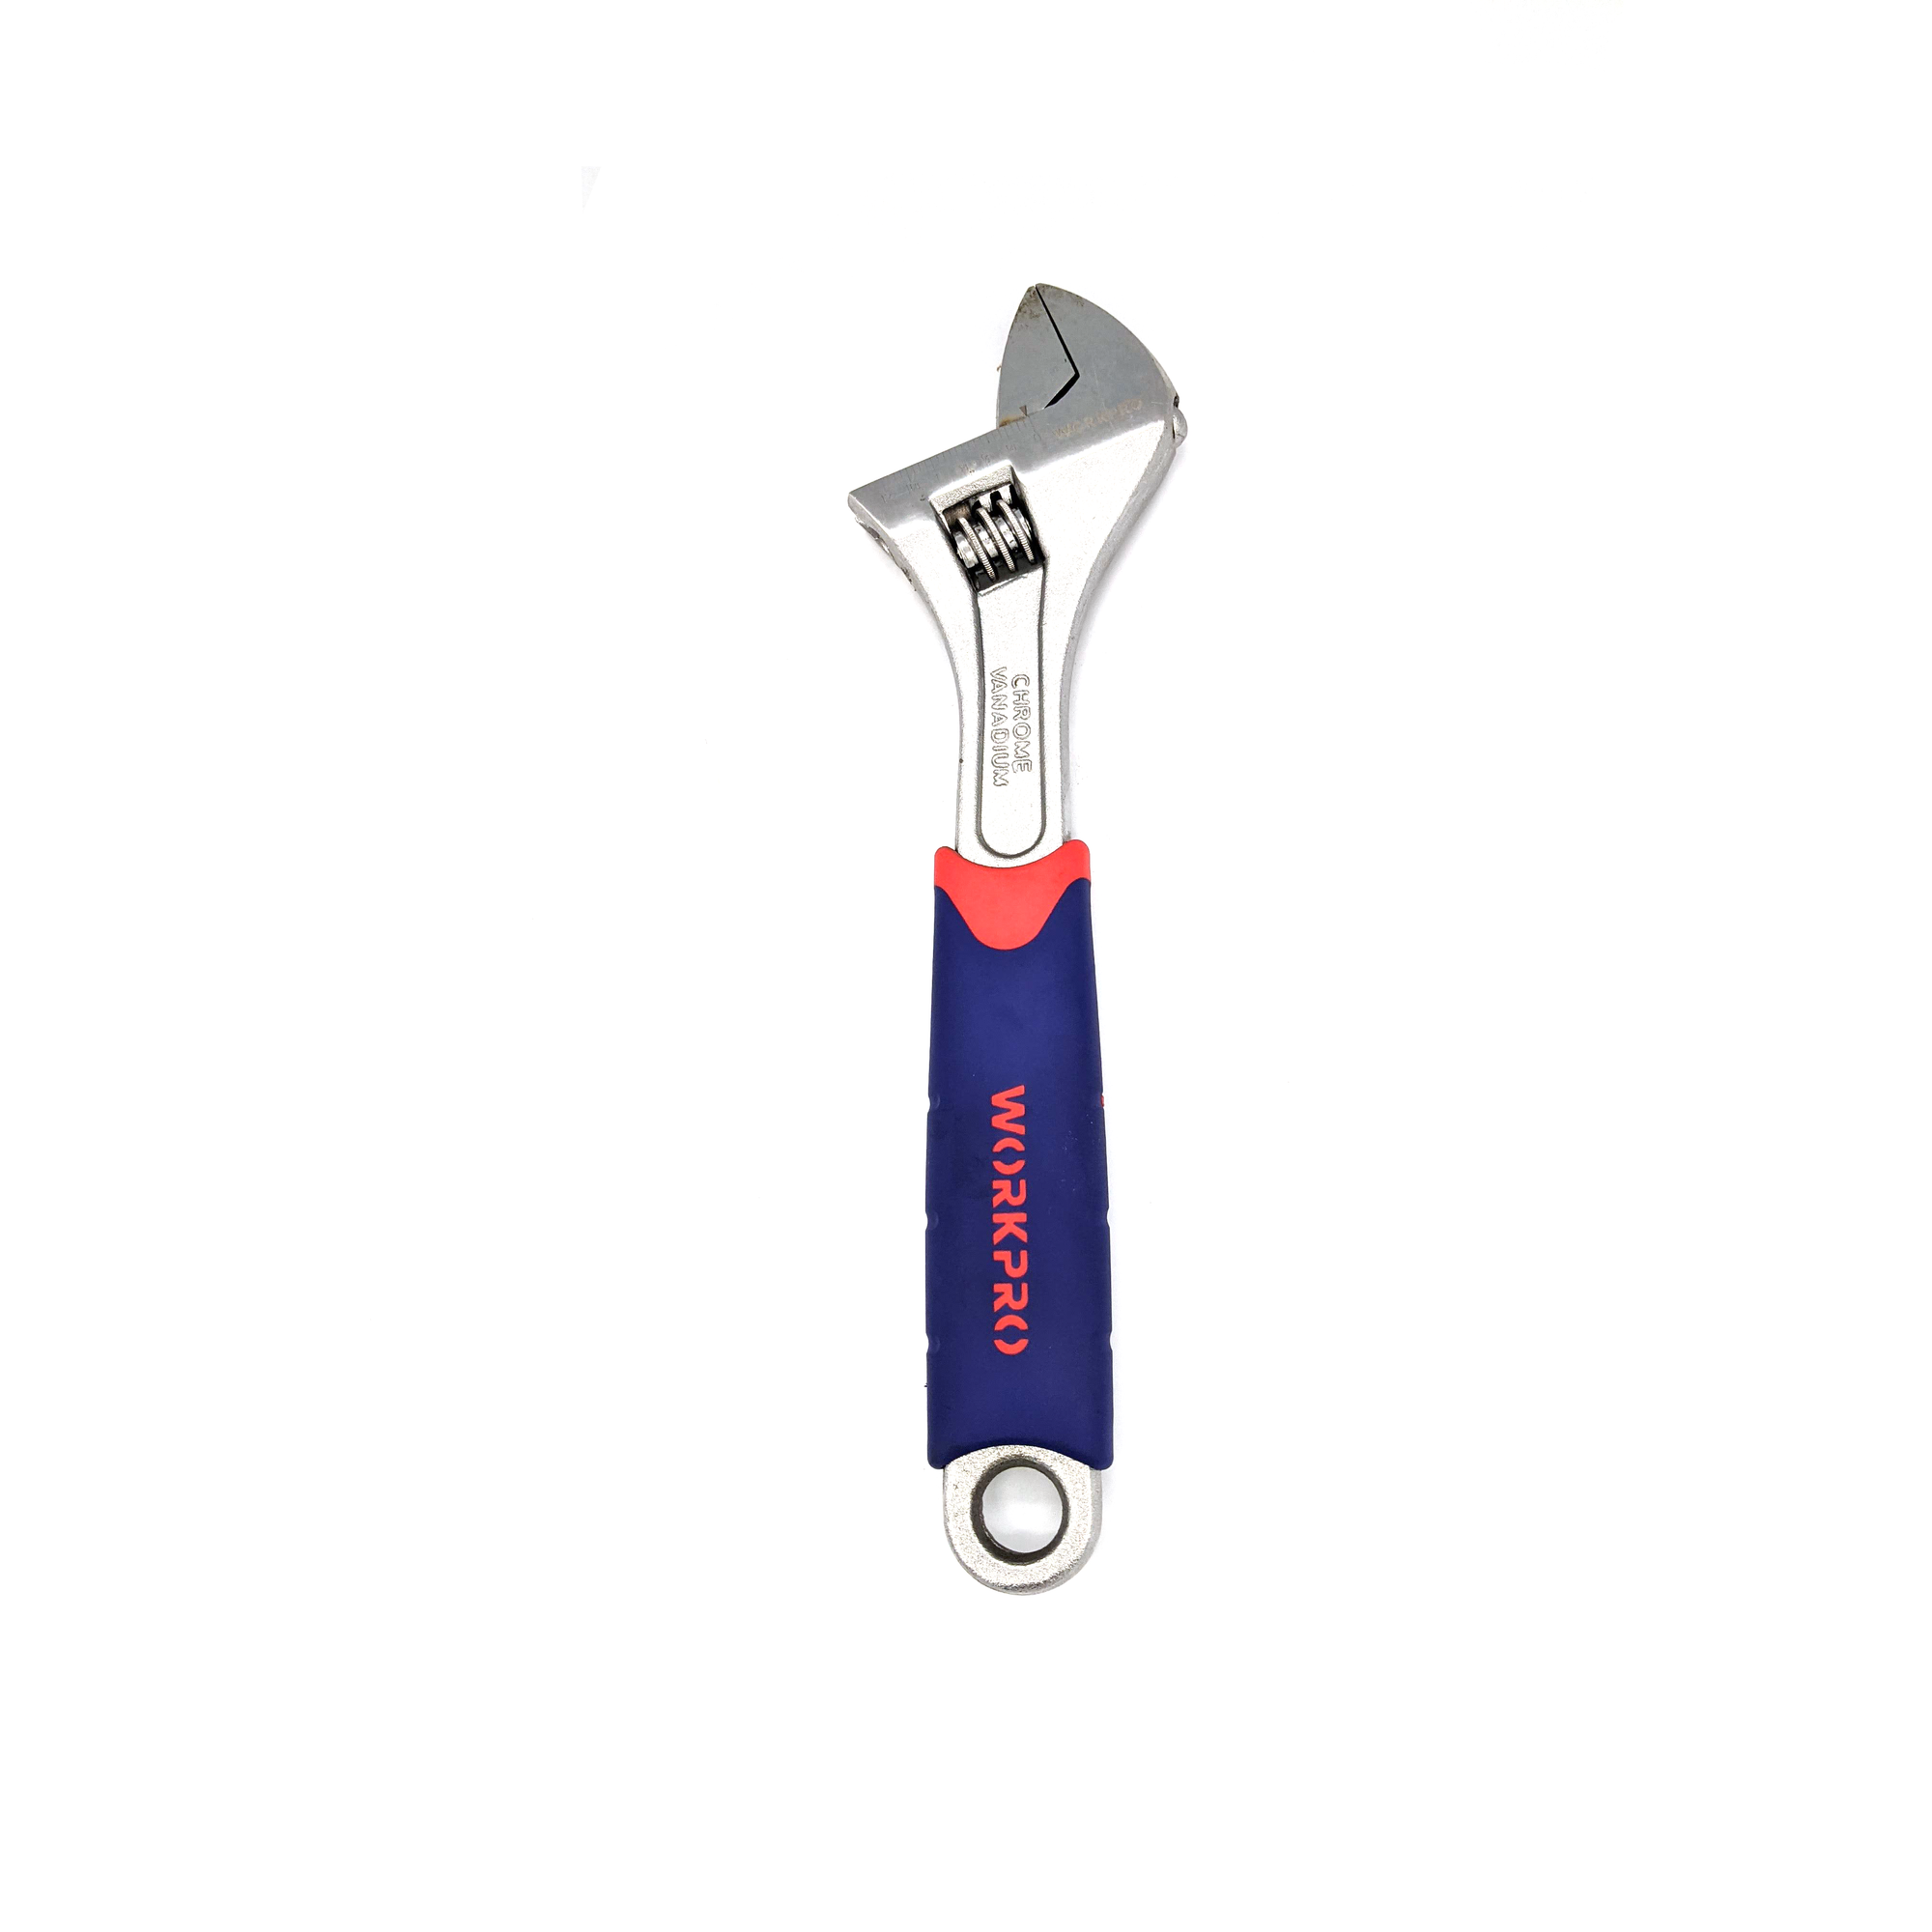 Workpro Adjustable Wrench 160Mm(6Inch)